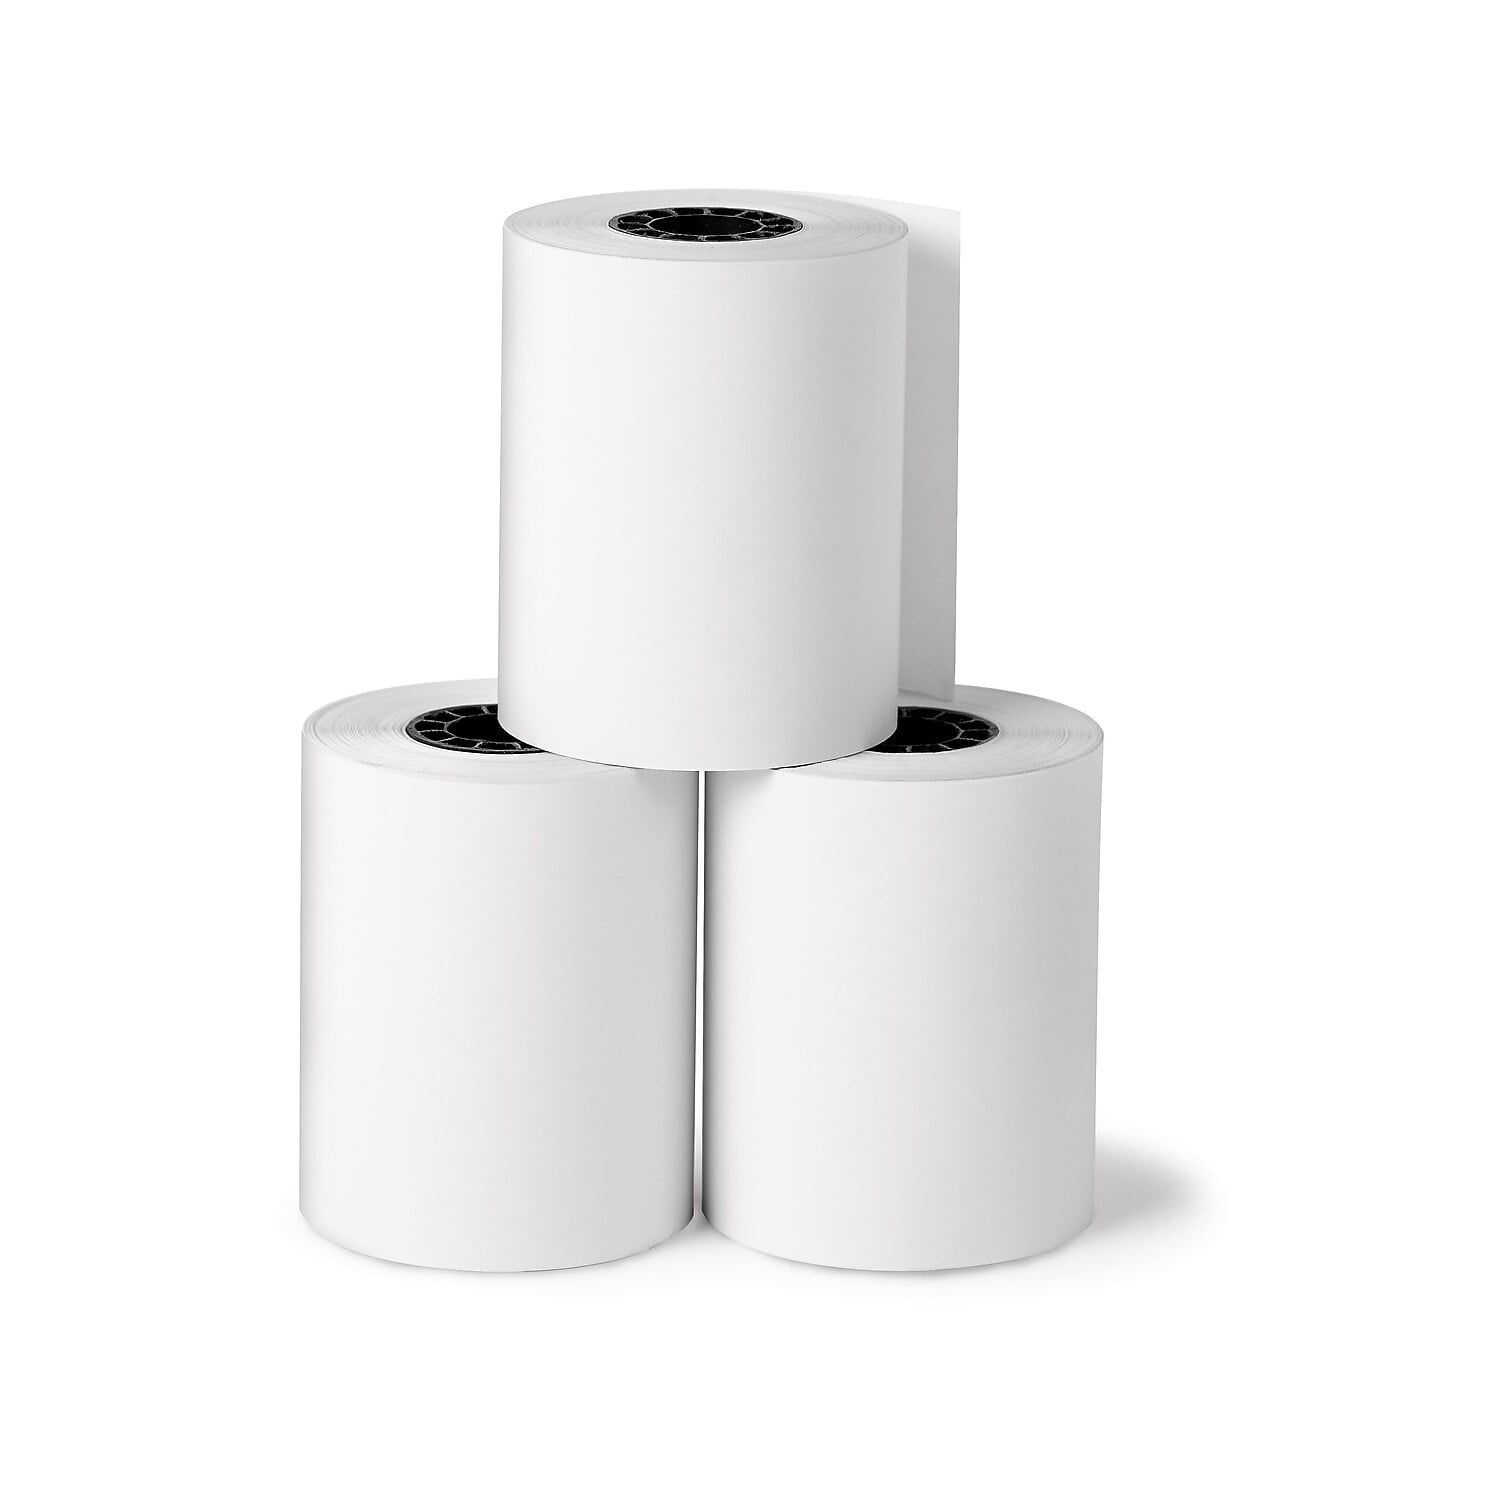 2 1/4' Thermal Paper Rolls